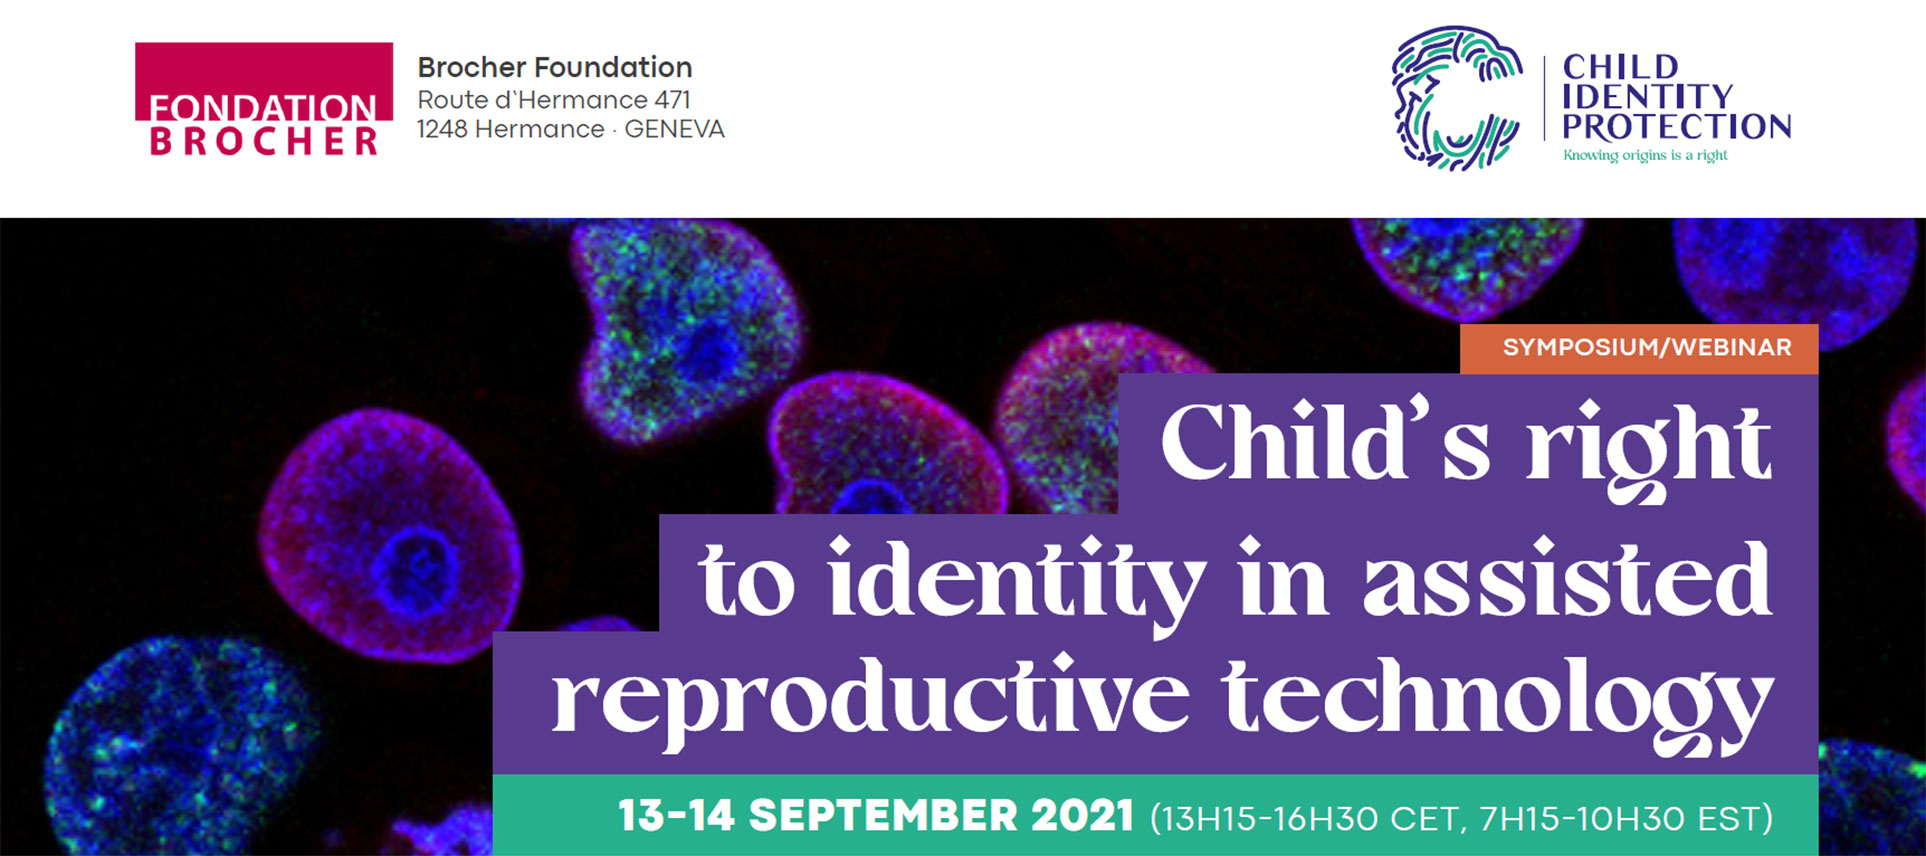 13-14 September 2021: Symposium/Webinar on Child's Right to Identity in Assisted Reproductive Technology 